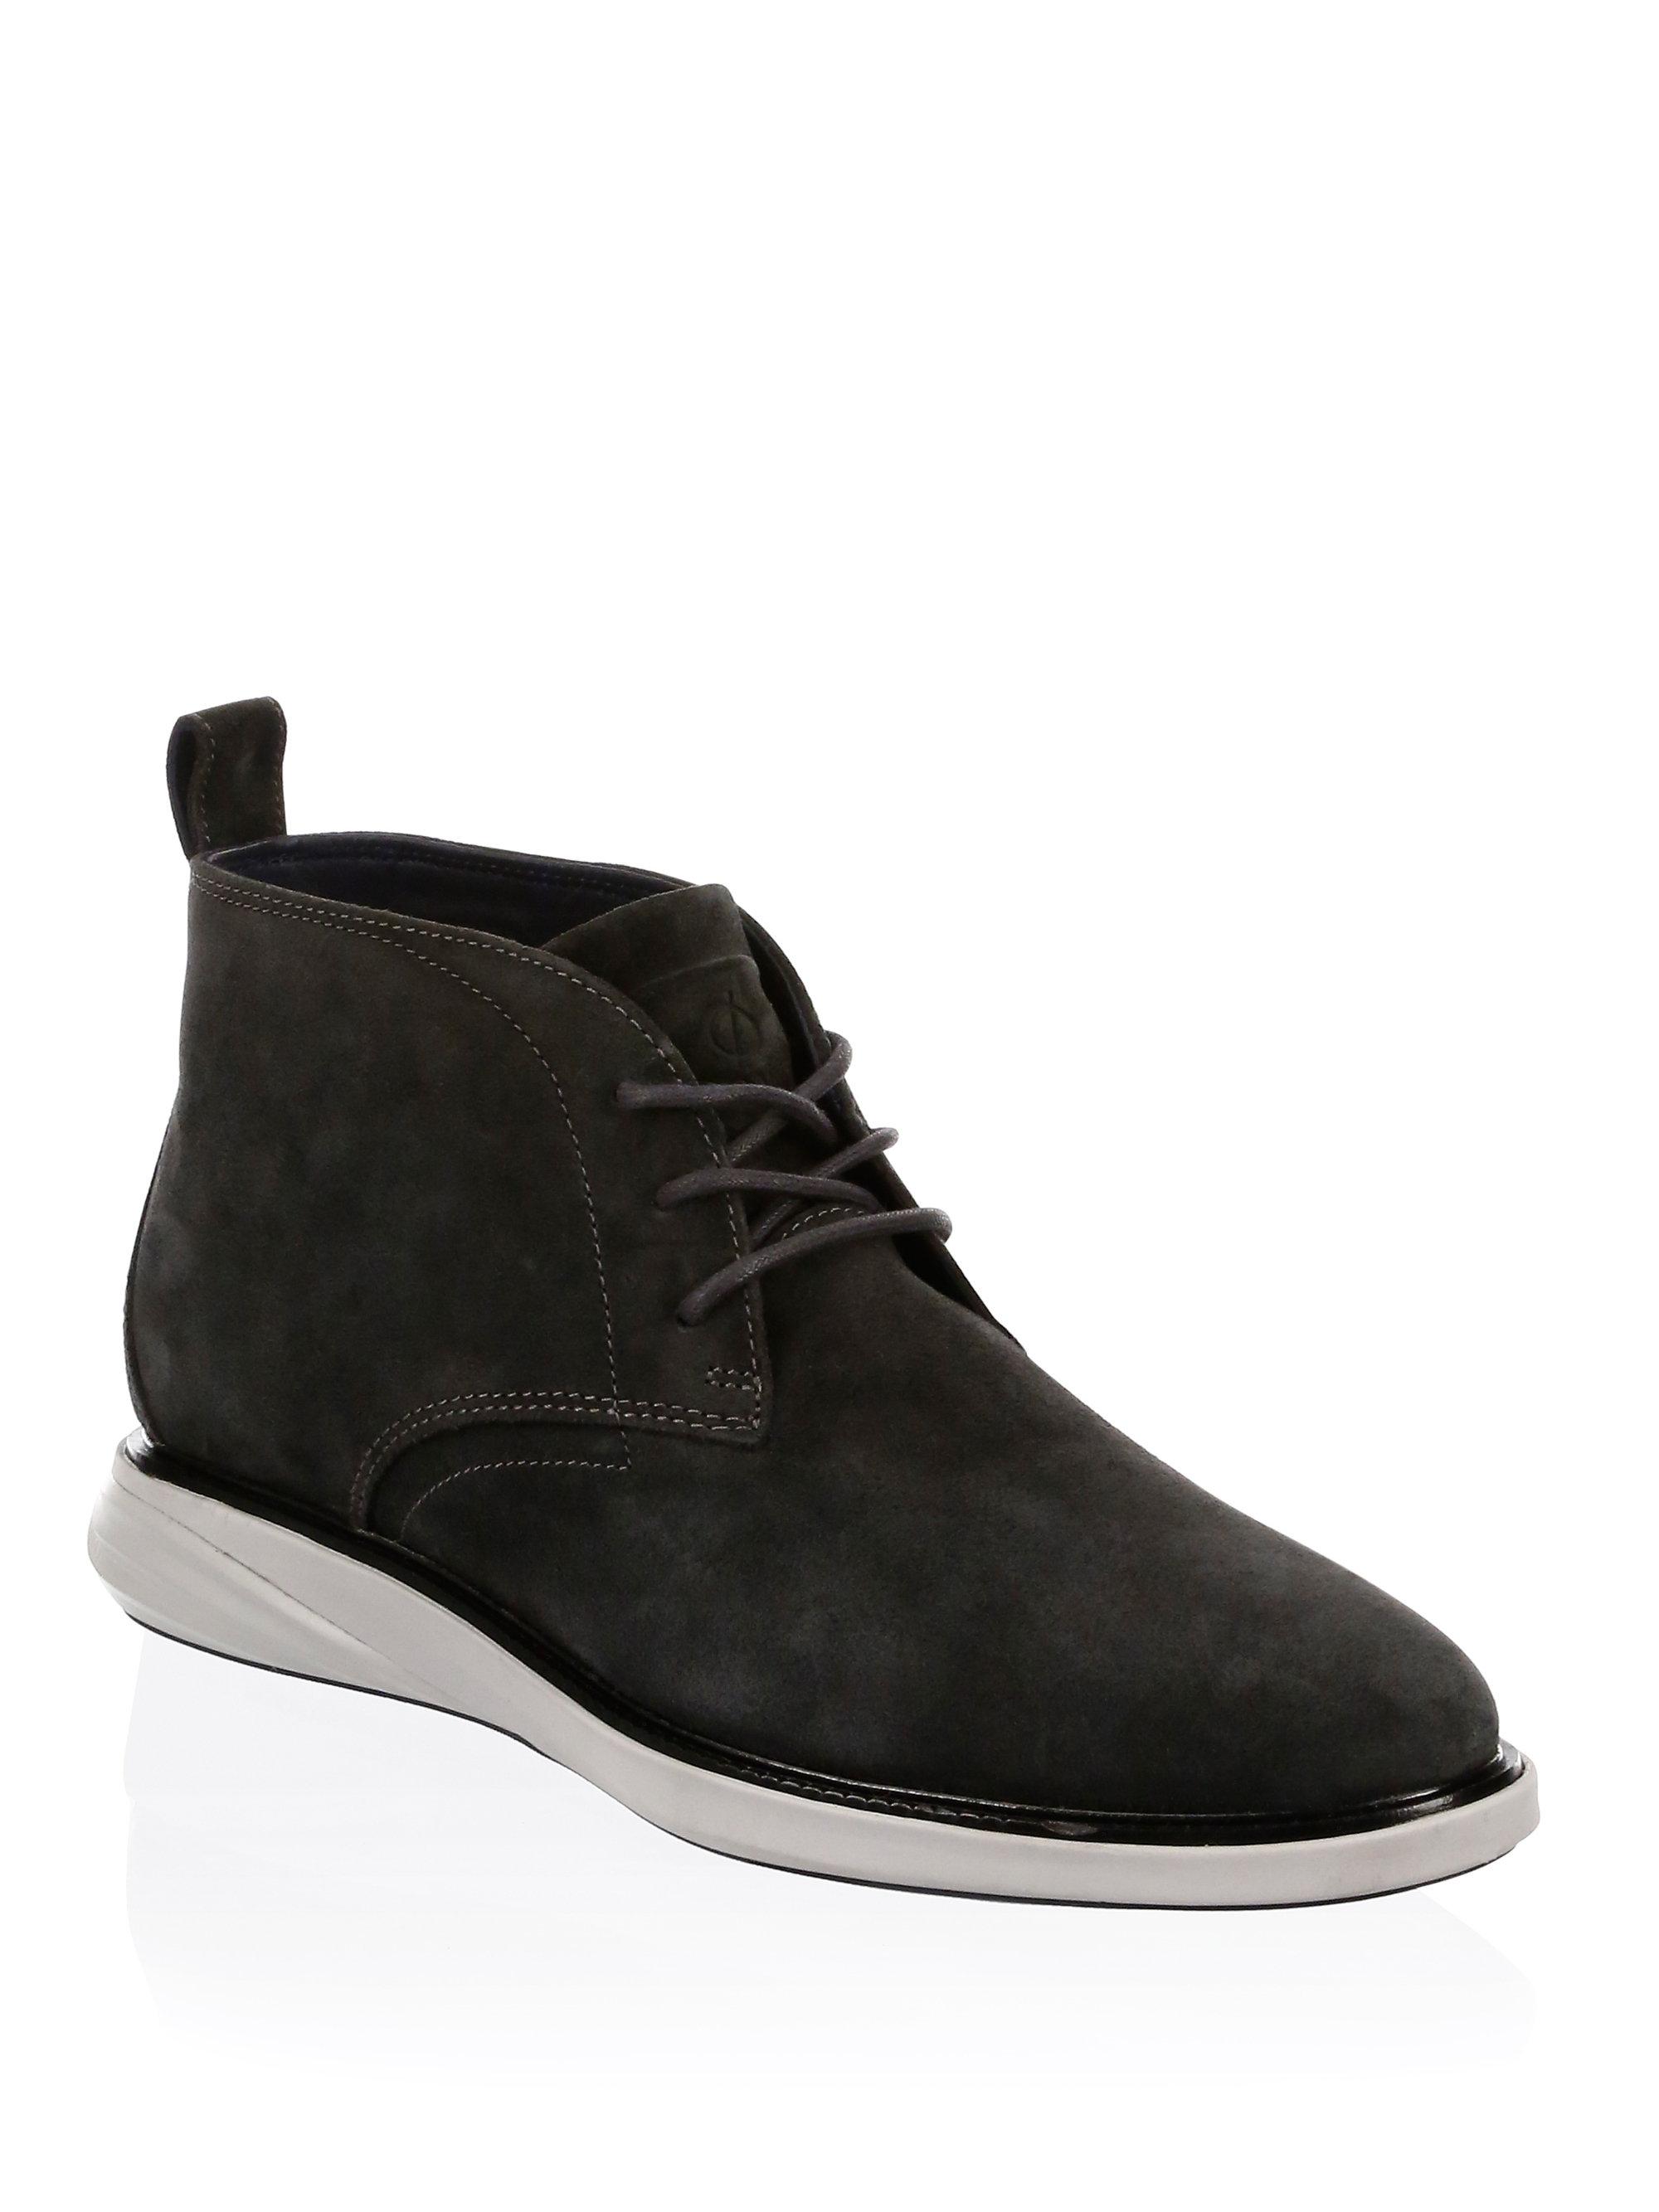 Lyst - Cole Haan Grand Evolution Suede Chukka Boots in Gray for Men